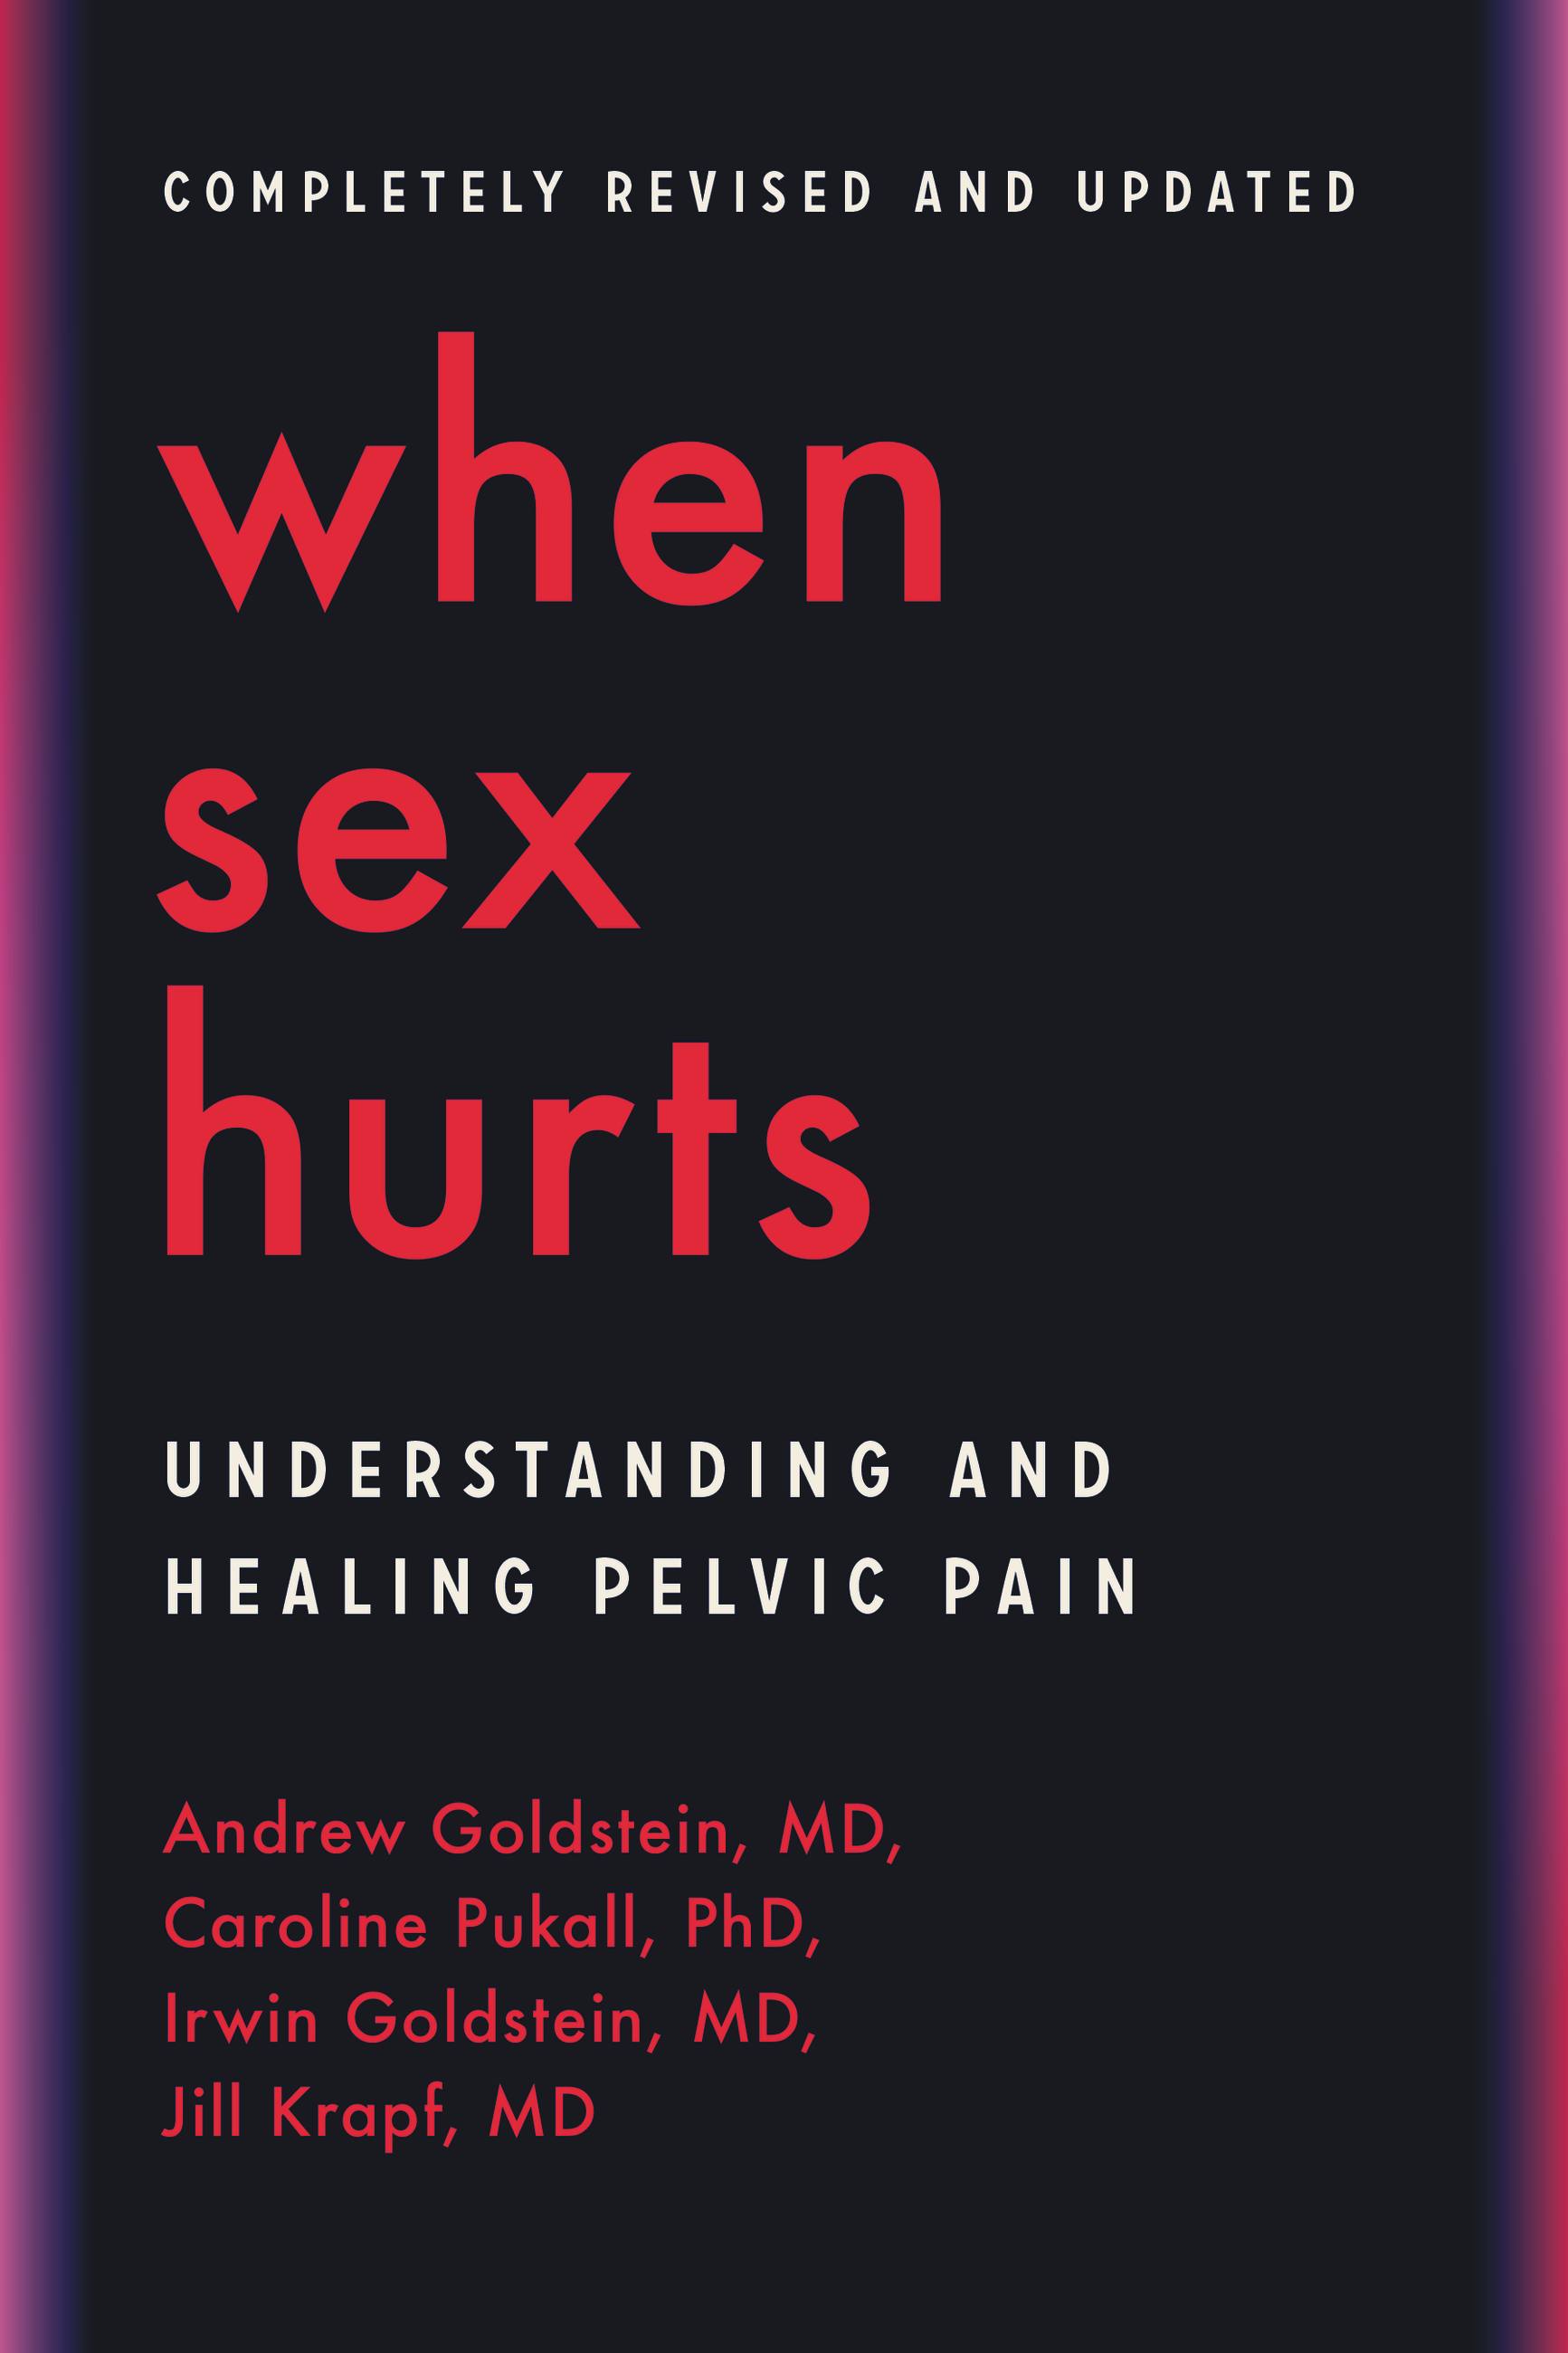 When Sex Hurts by Andrew Goldstein, MD Hachette Book Group image